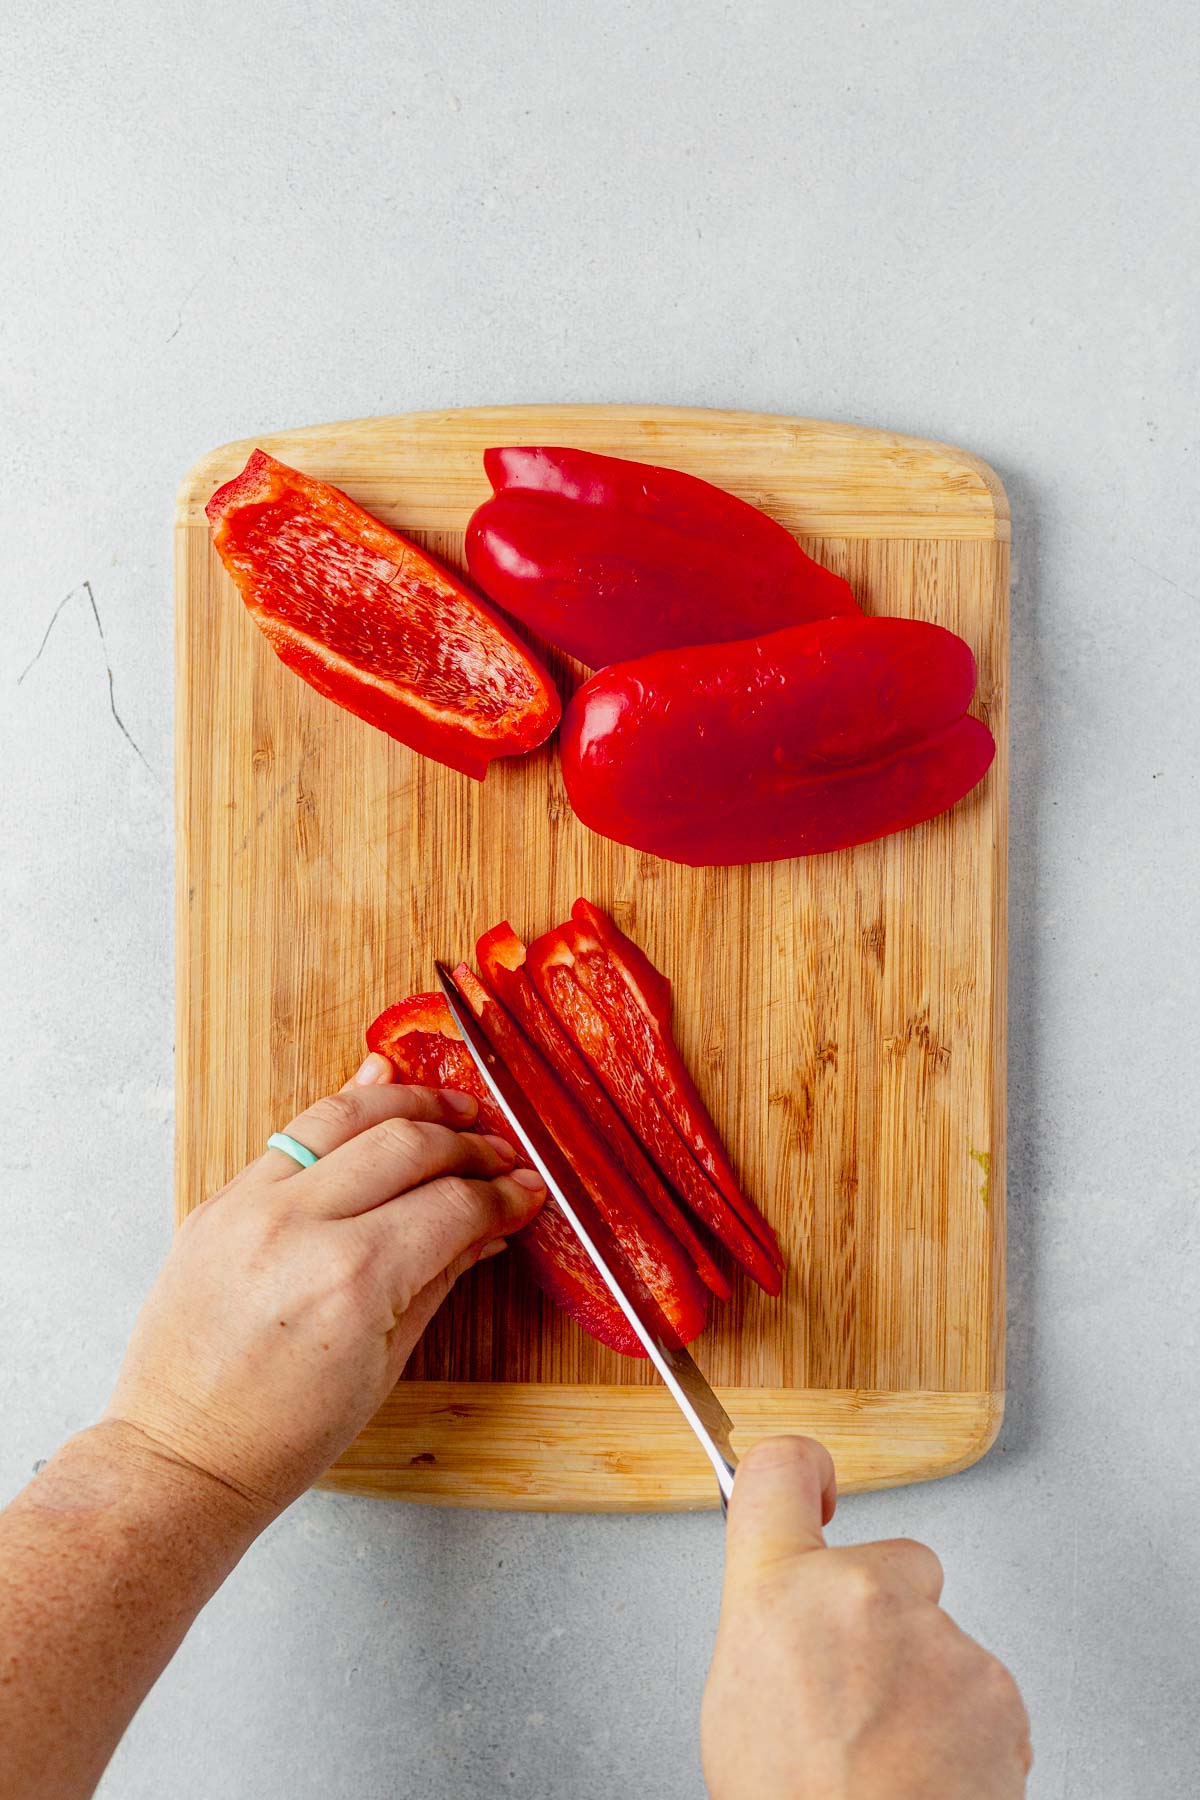 red bell pepper sliced on a wooden cutting board